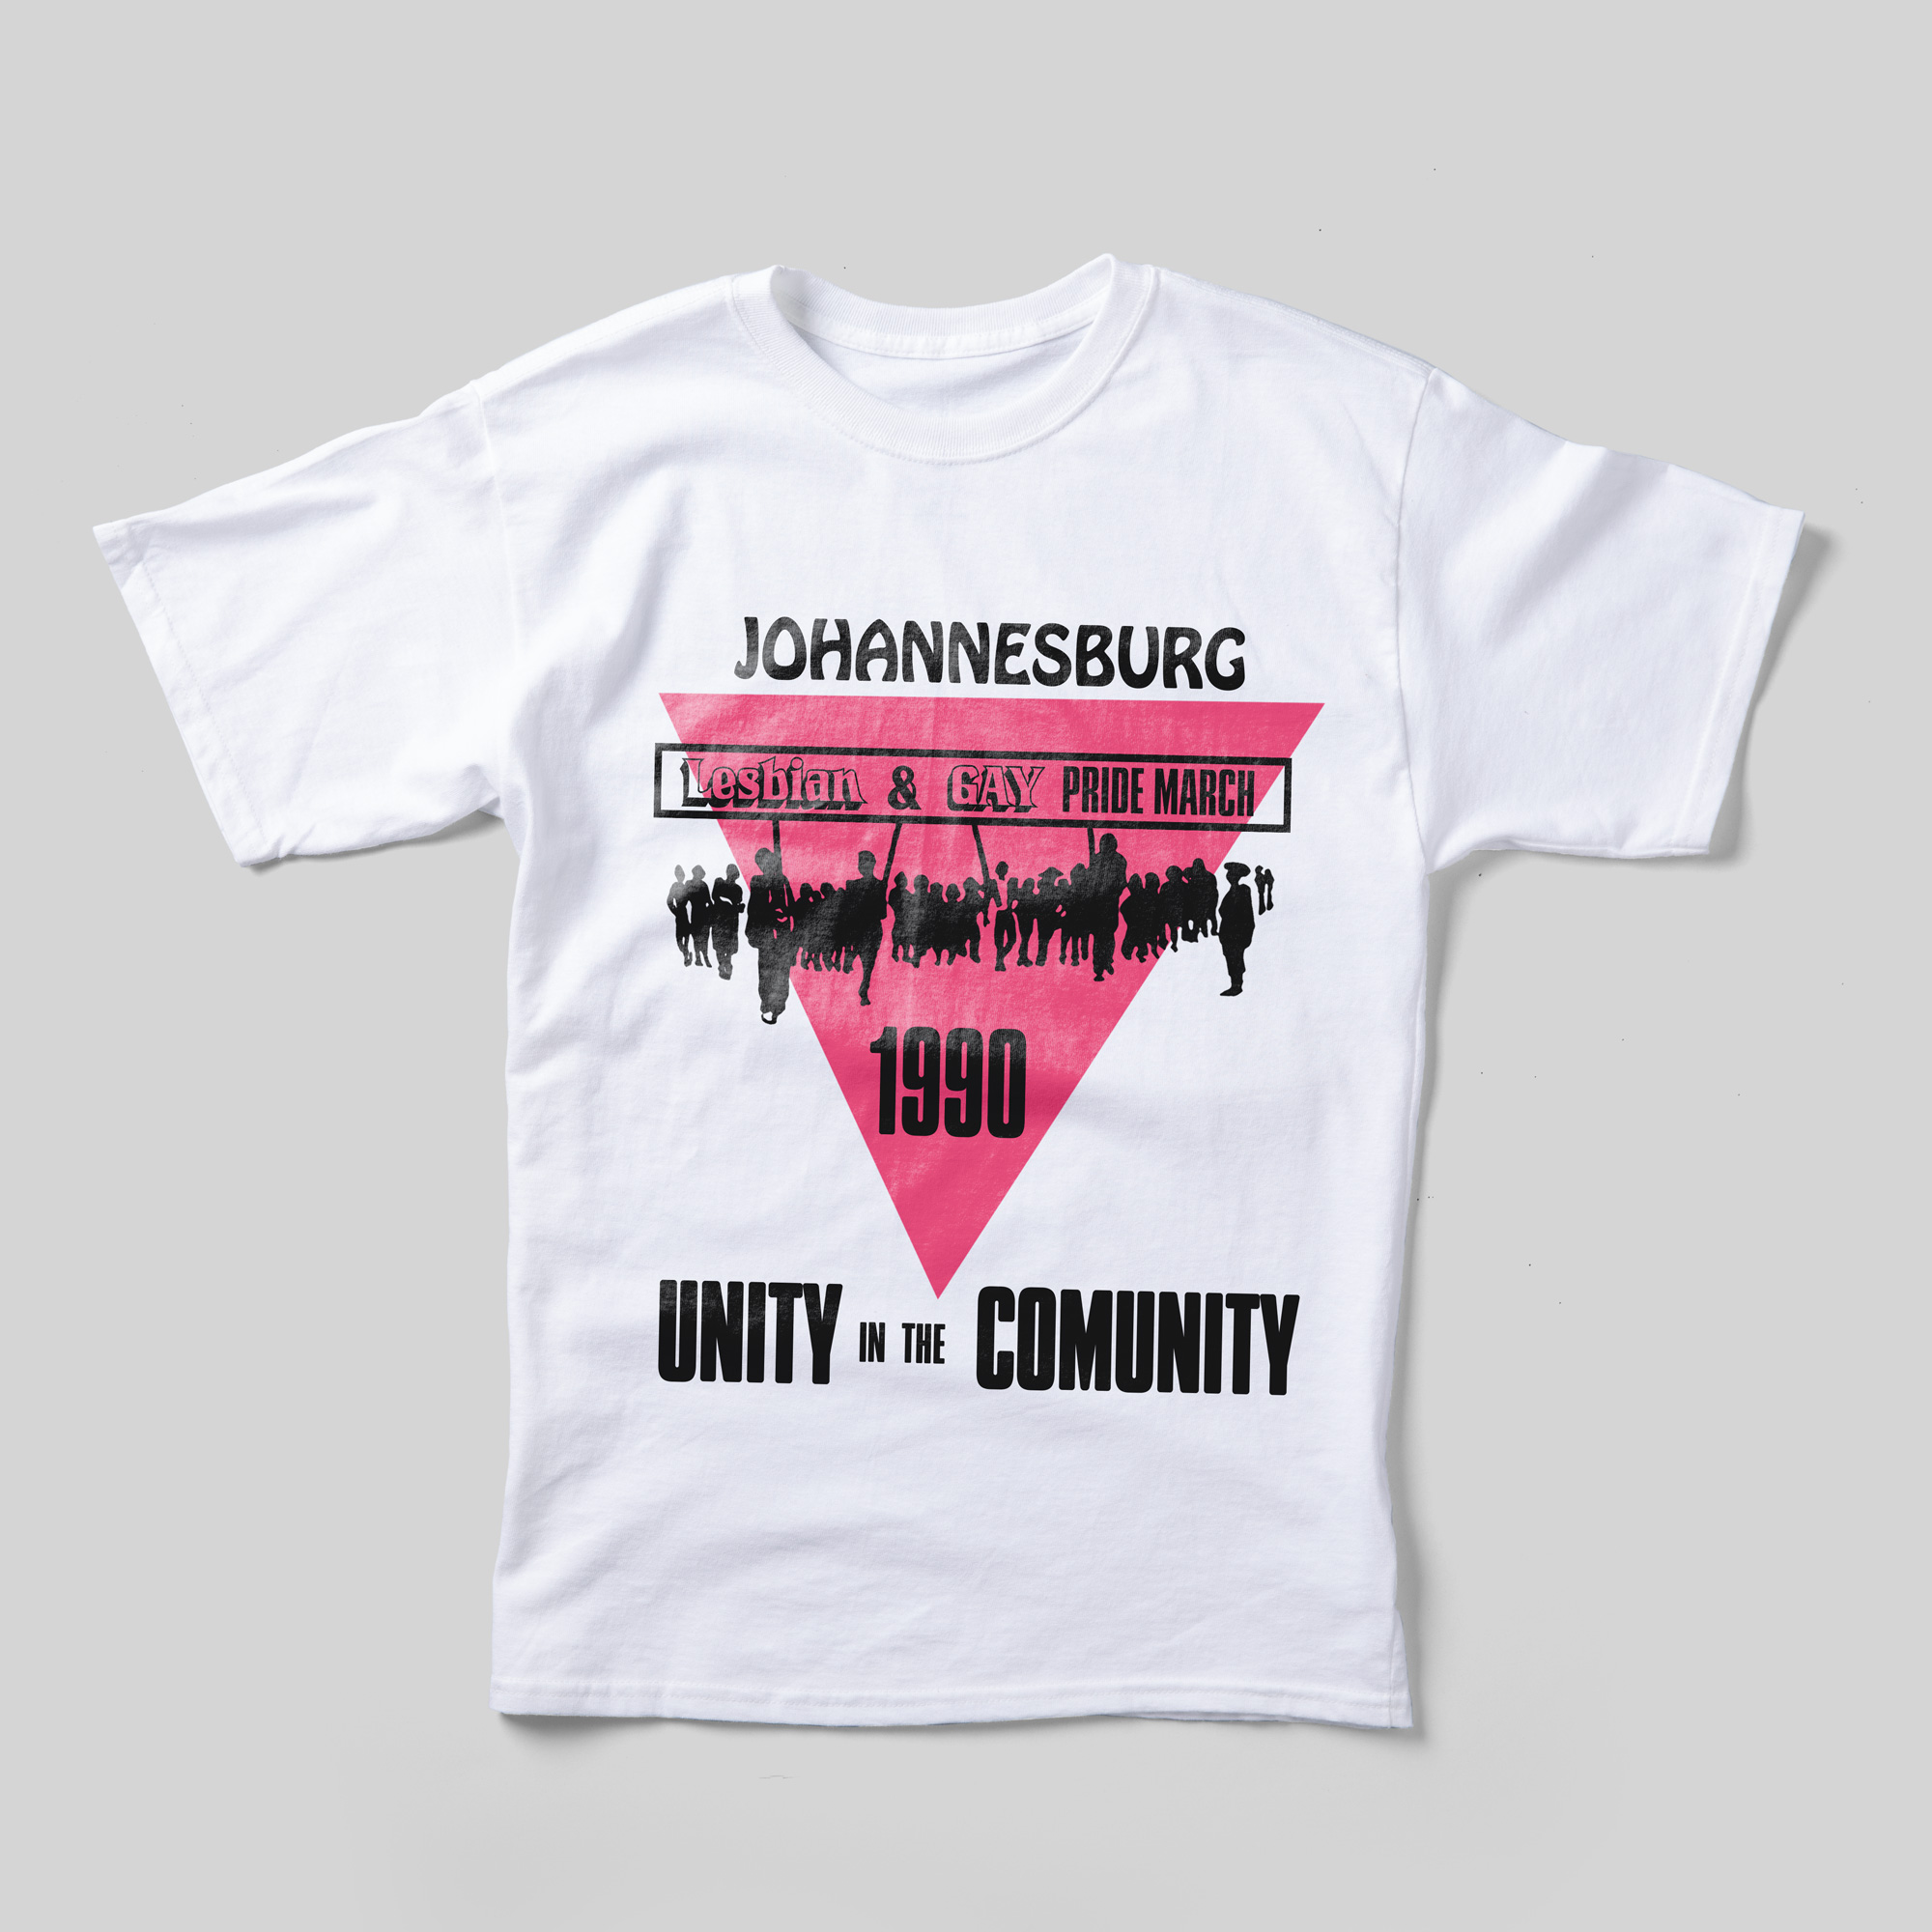 A white t-shirt that reads "Johannesburg Lesbian & Gay Pride March 1990" in black text superimposed over an upside-down pink triangle and a black illustration of marchers. Beneath the image, it reads "Unity in the Community."